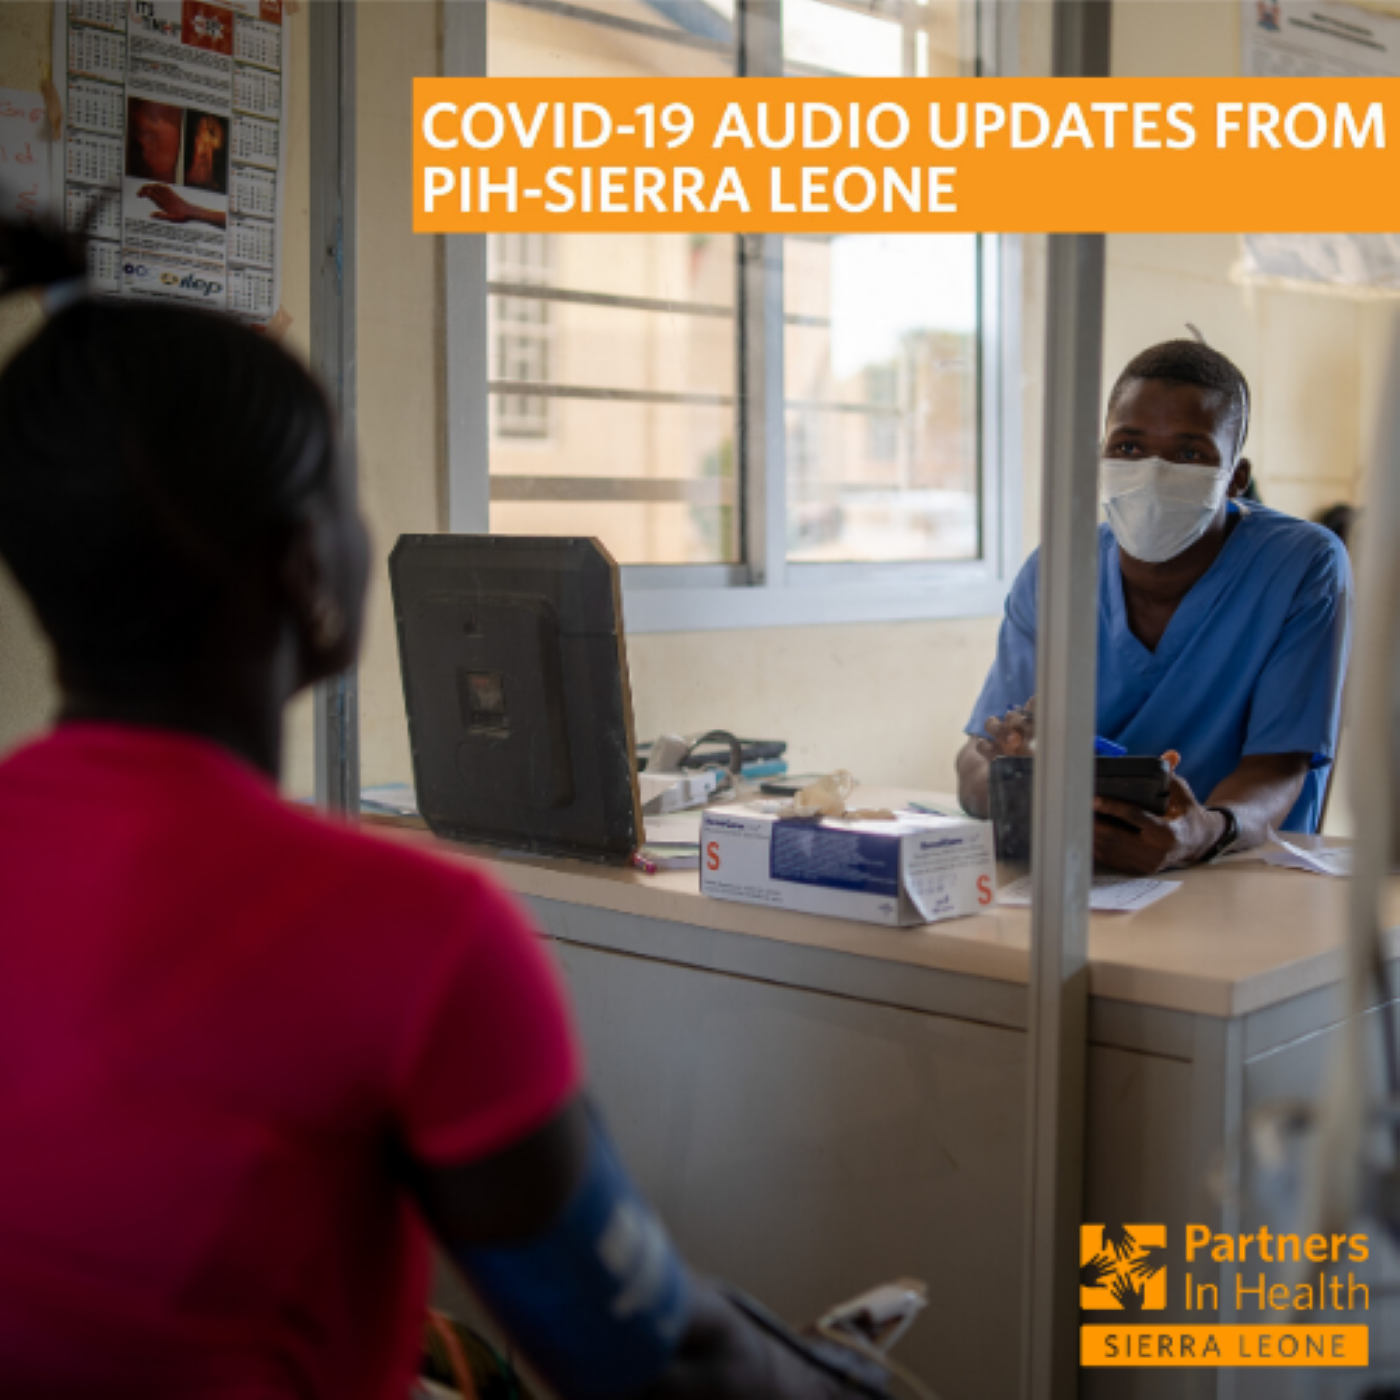 Artwork for COVID-19 Updates from PIH-Sierra Leone